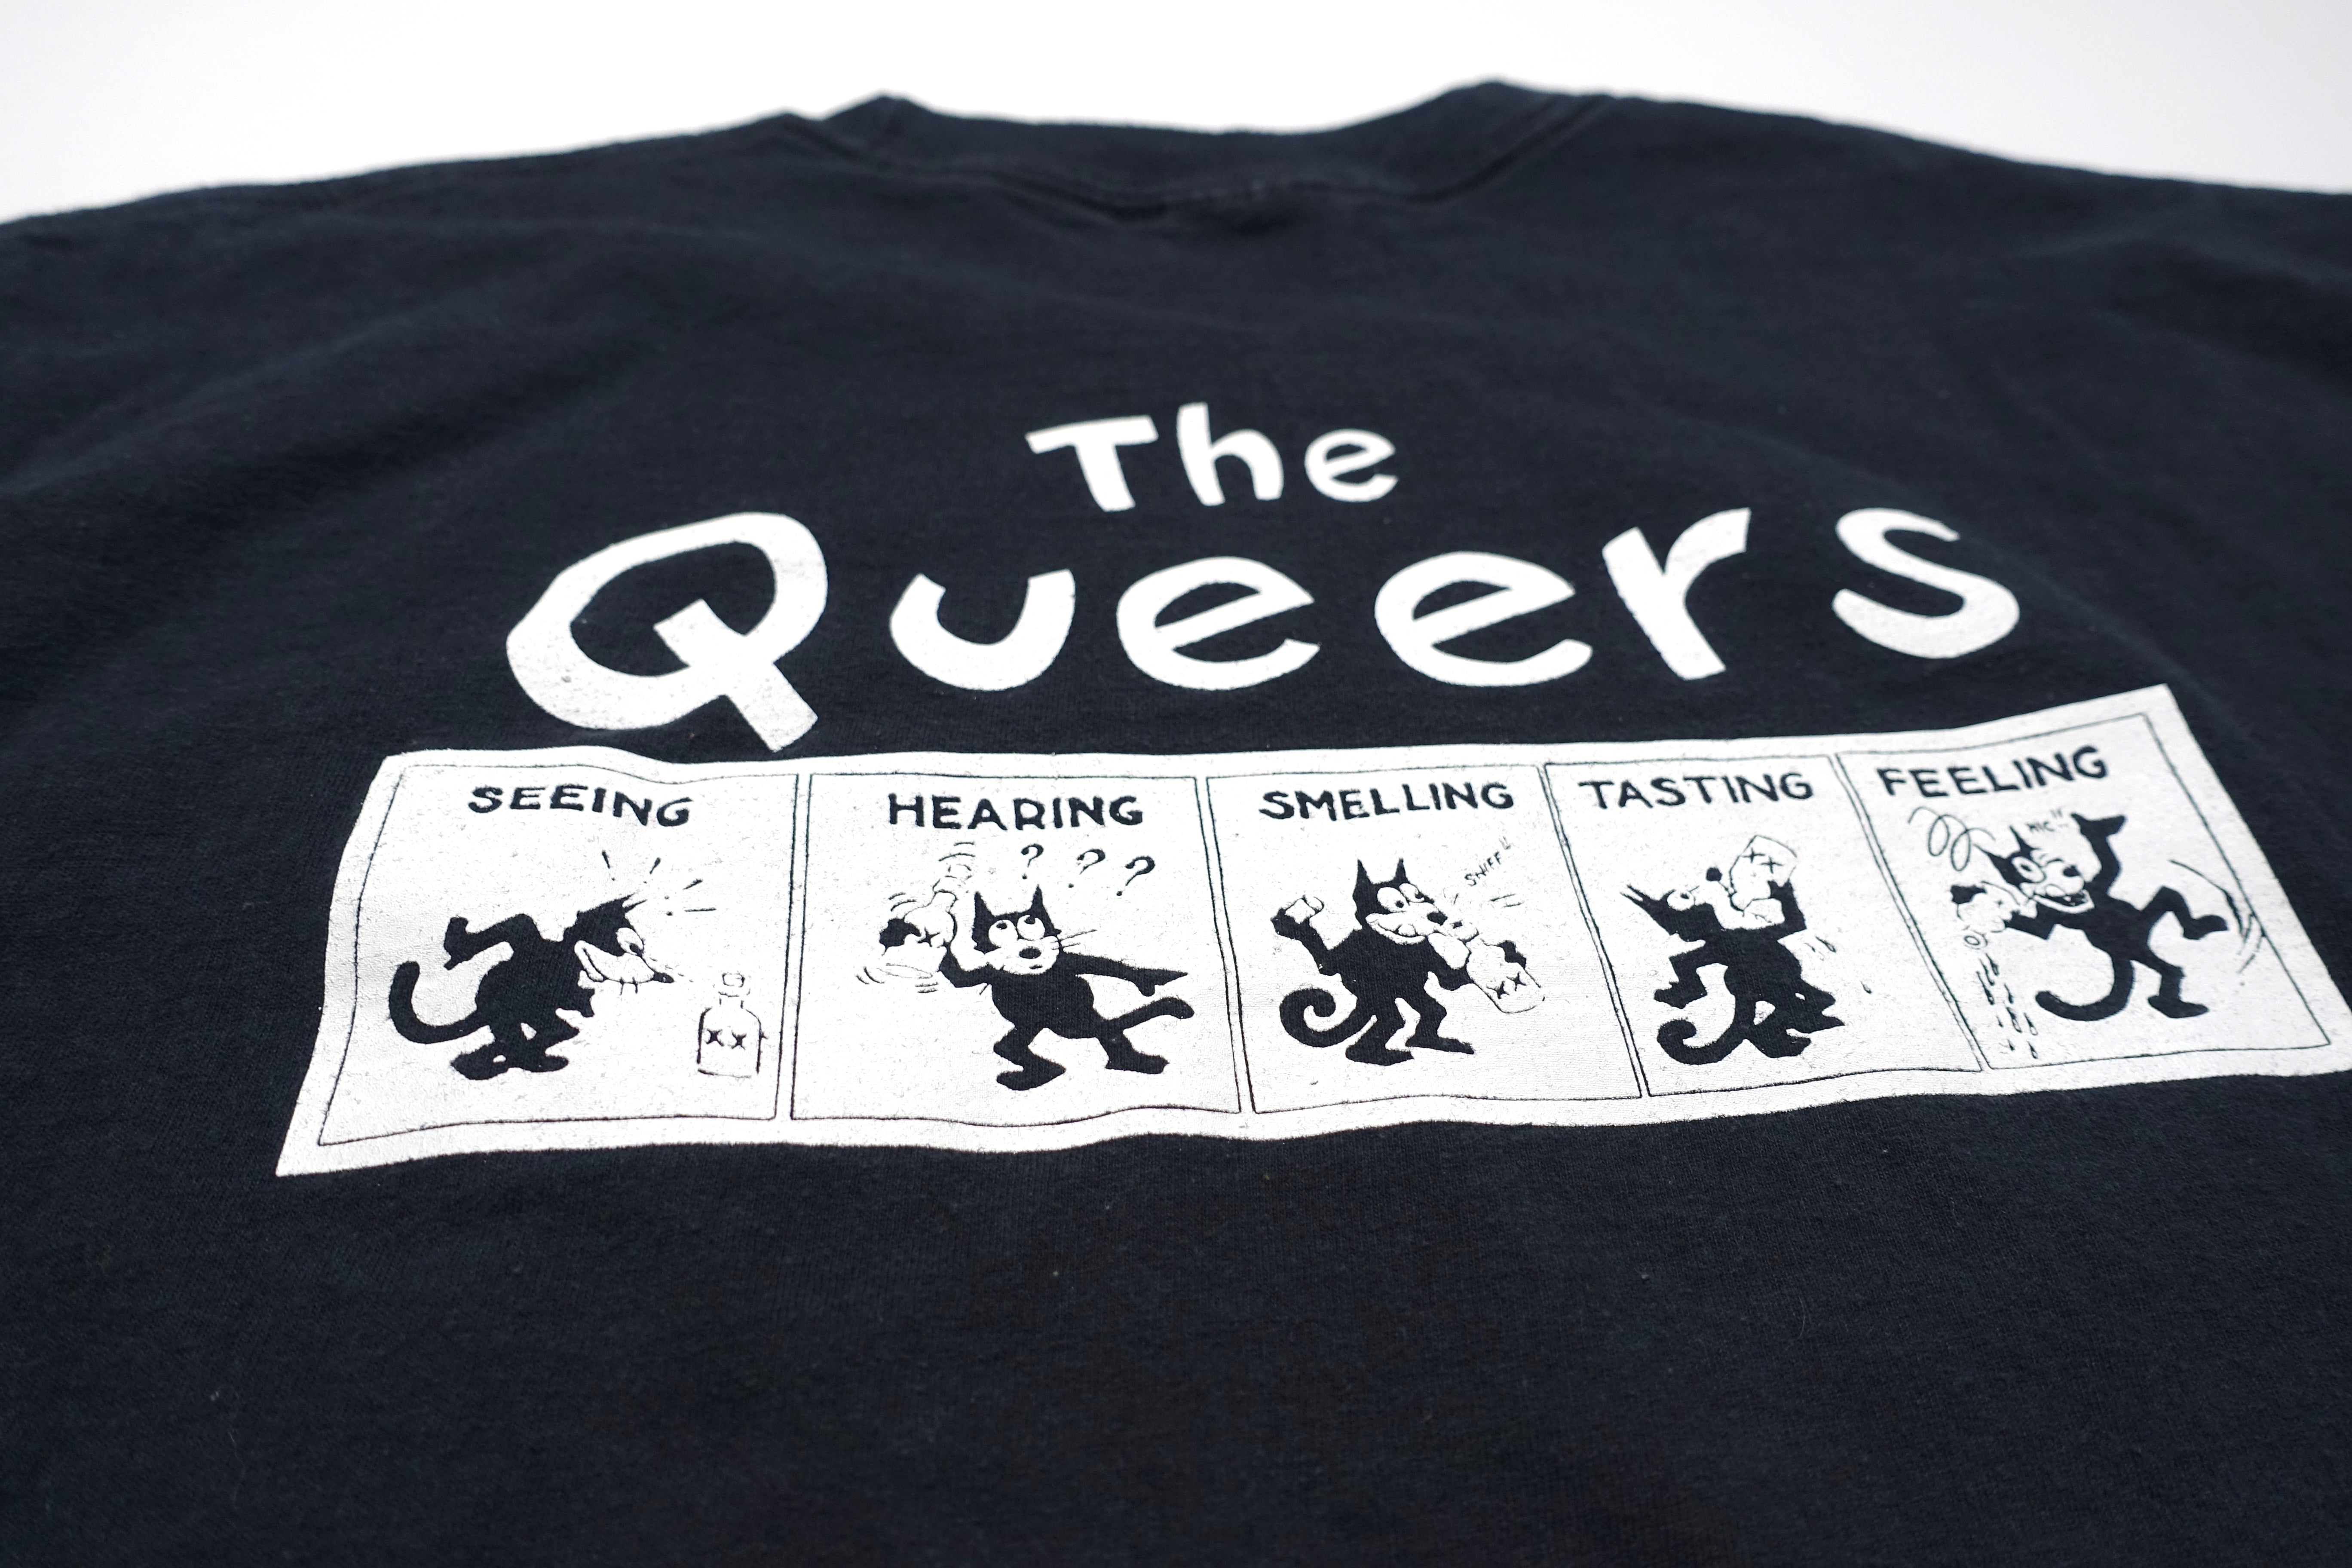 The Queers - Seeing, Hearing, Smelling, Tasting, Feeling Tour Shirt Size XL